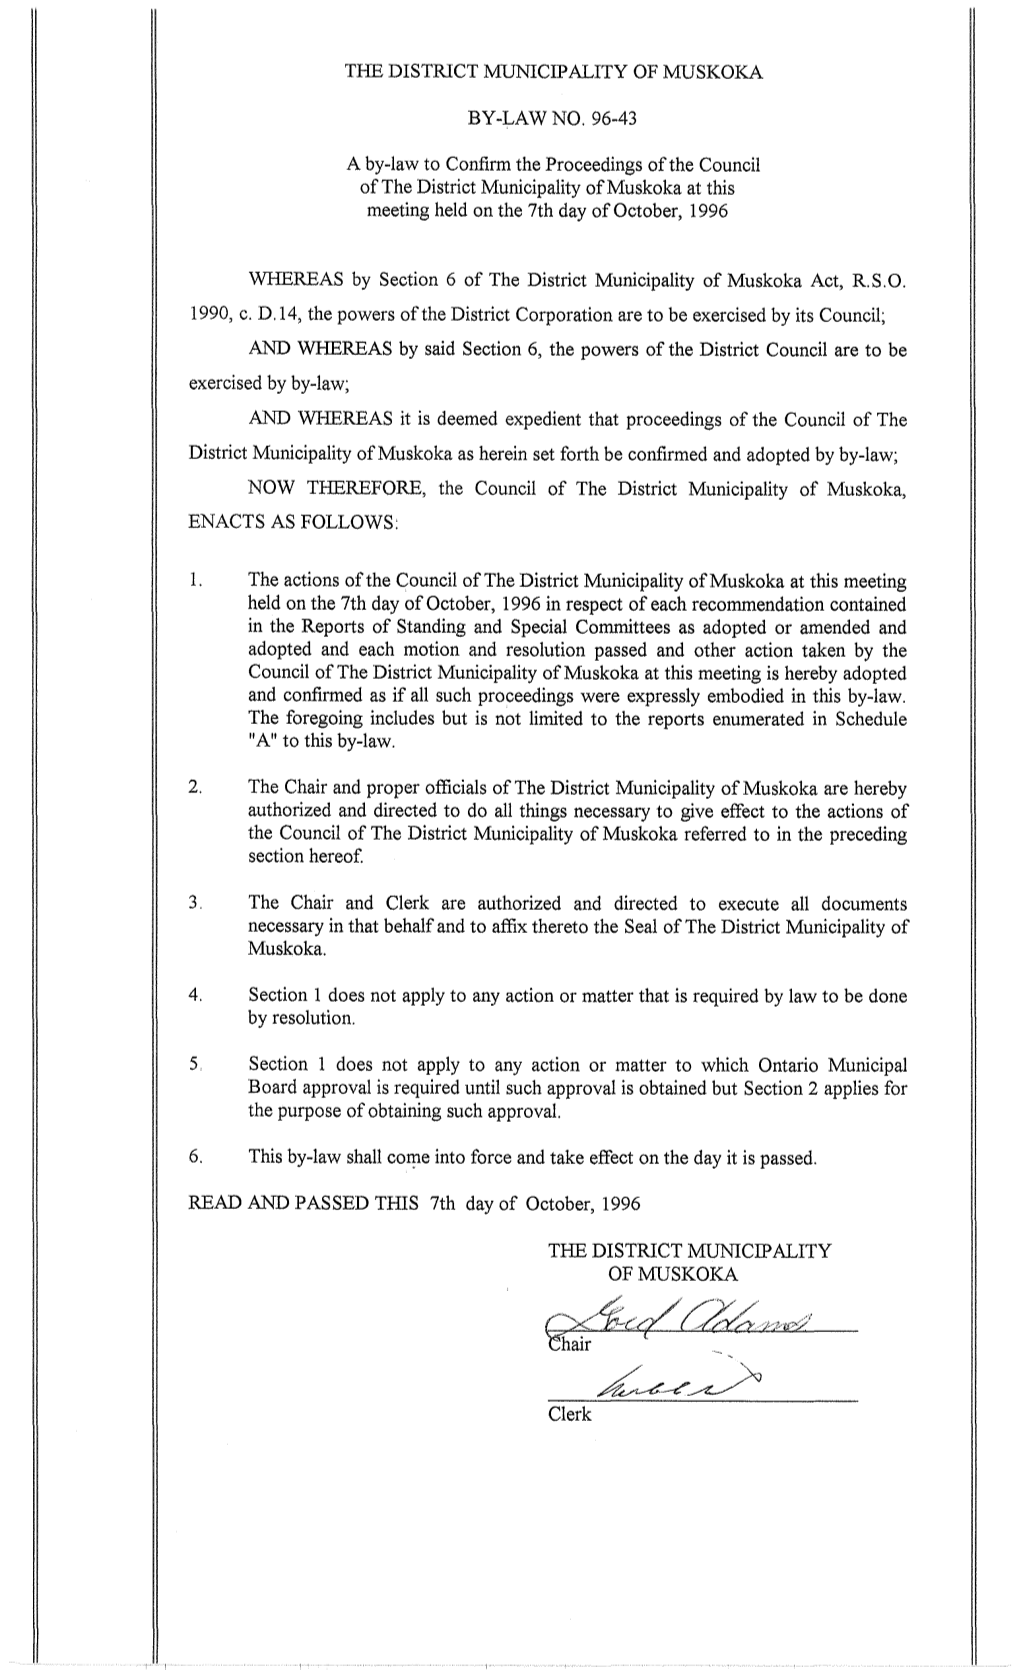 THE DISTRICT MUNICIPALITY of MUSKOKA BY-LAW NO. 96-43 a By